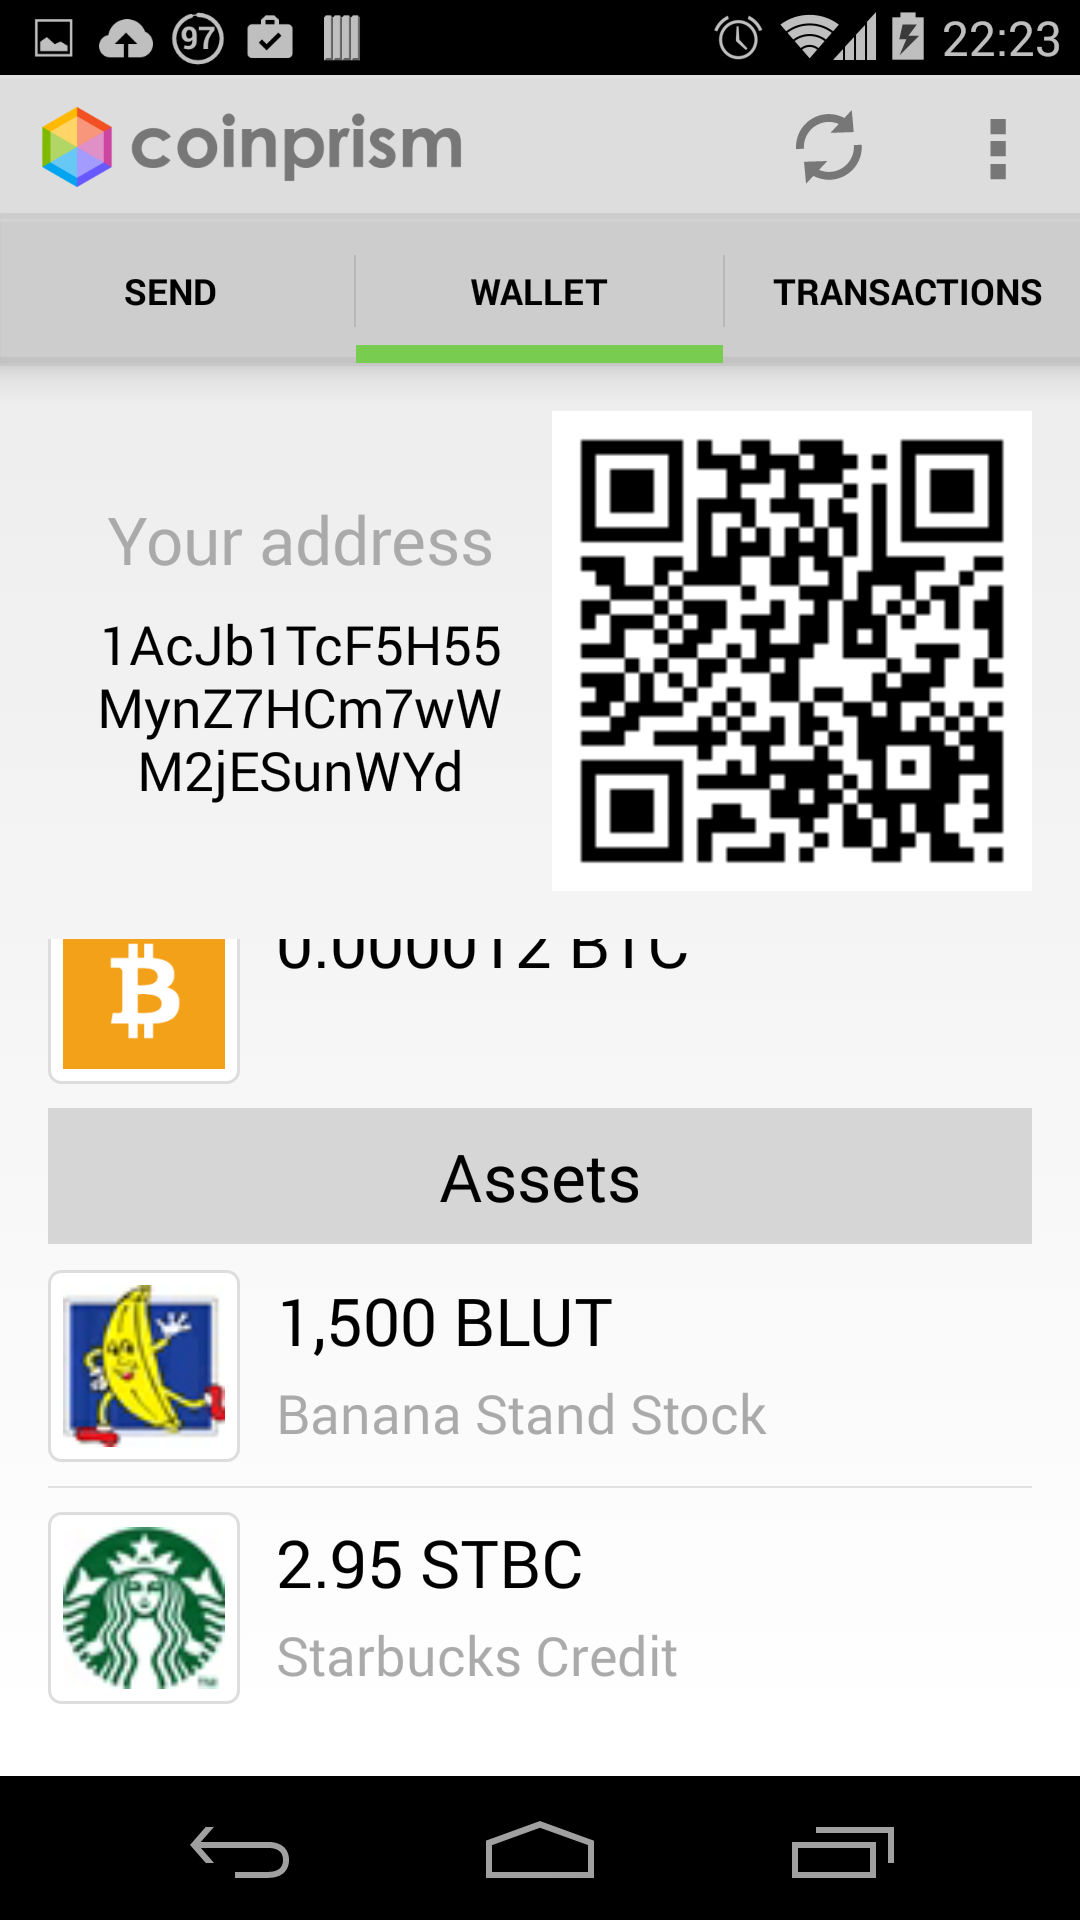 Thumbnail for File:Coinprism Android App 2.png